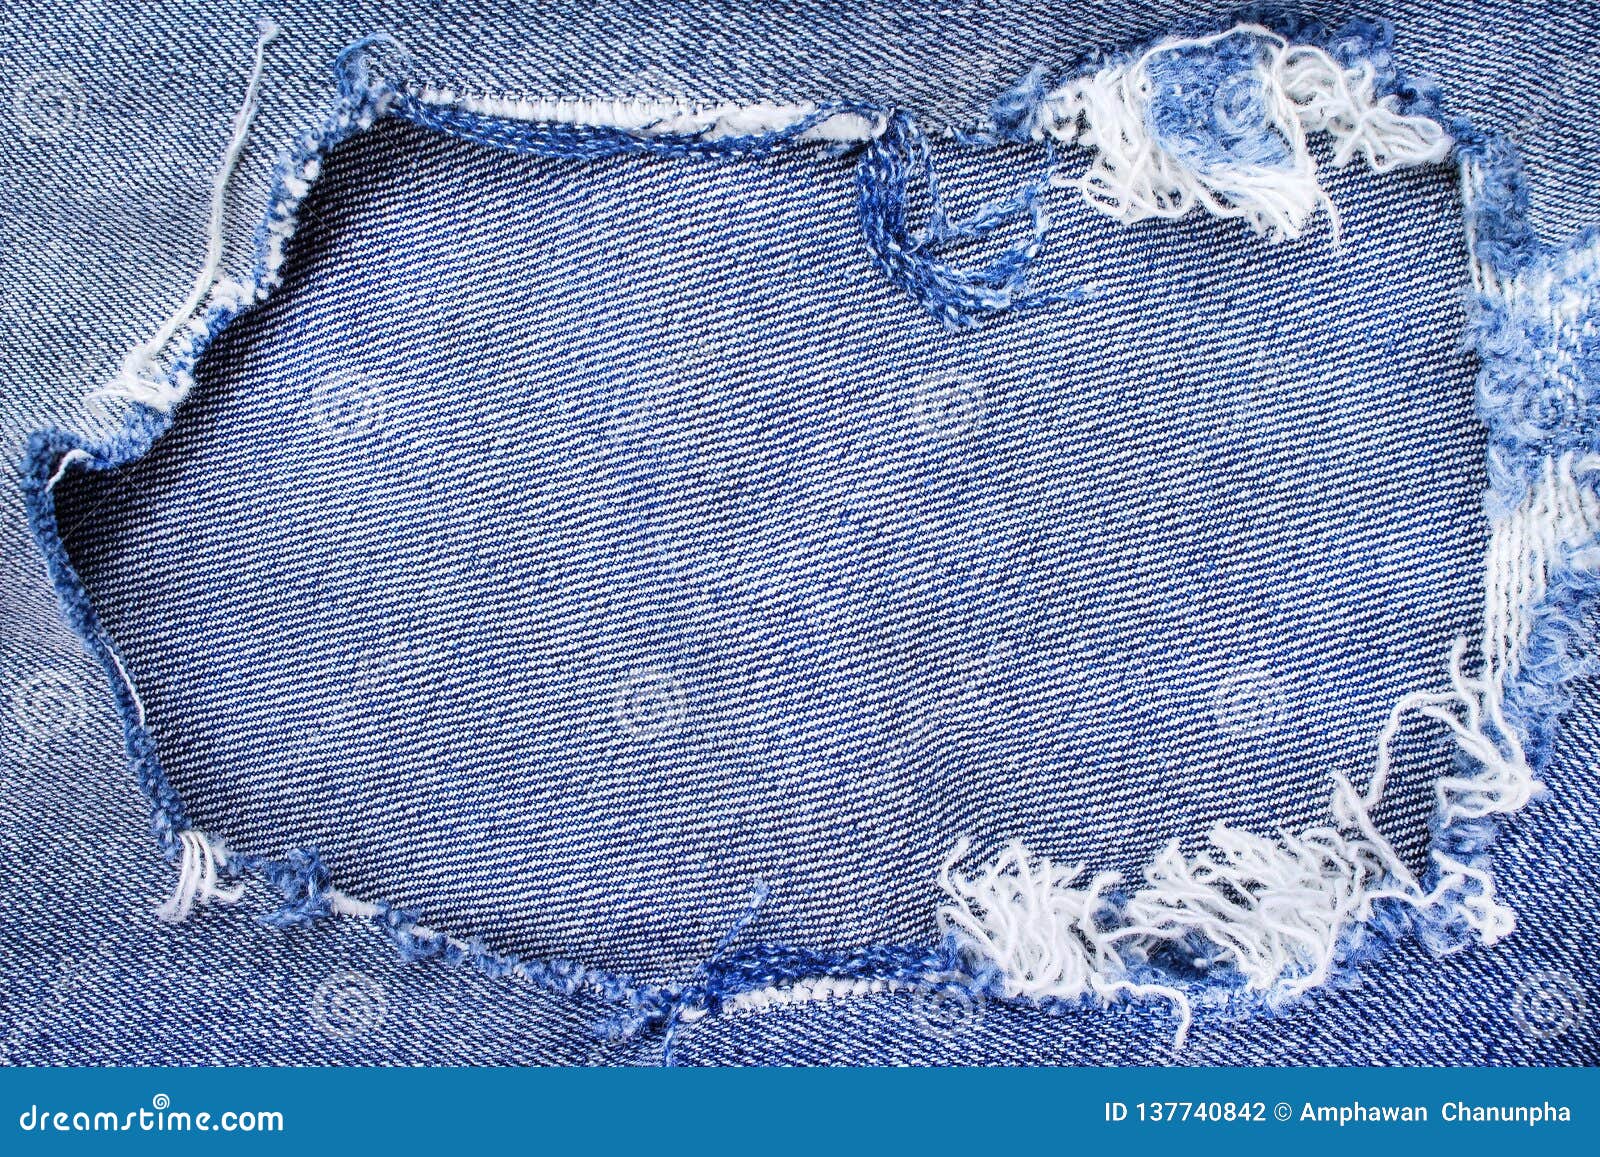 Blue Jeans with Ripped Patterns Texture for Background, Hole and White ...